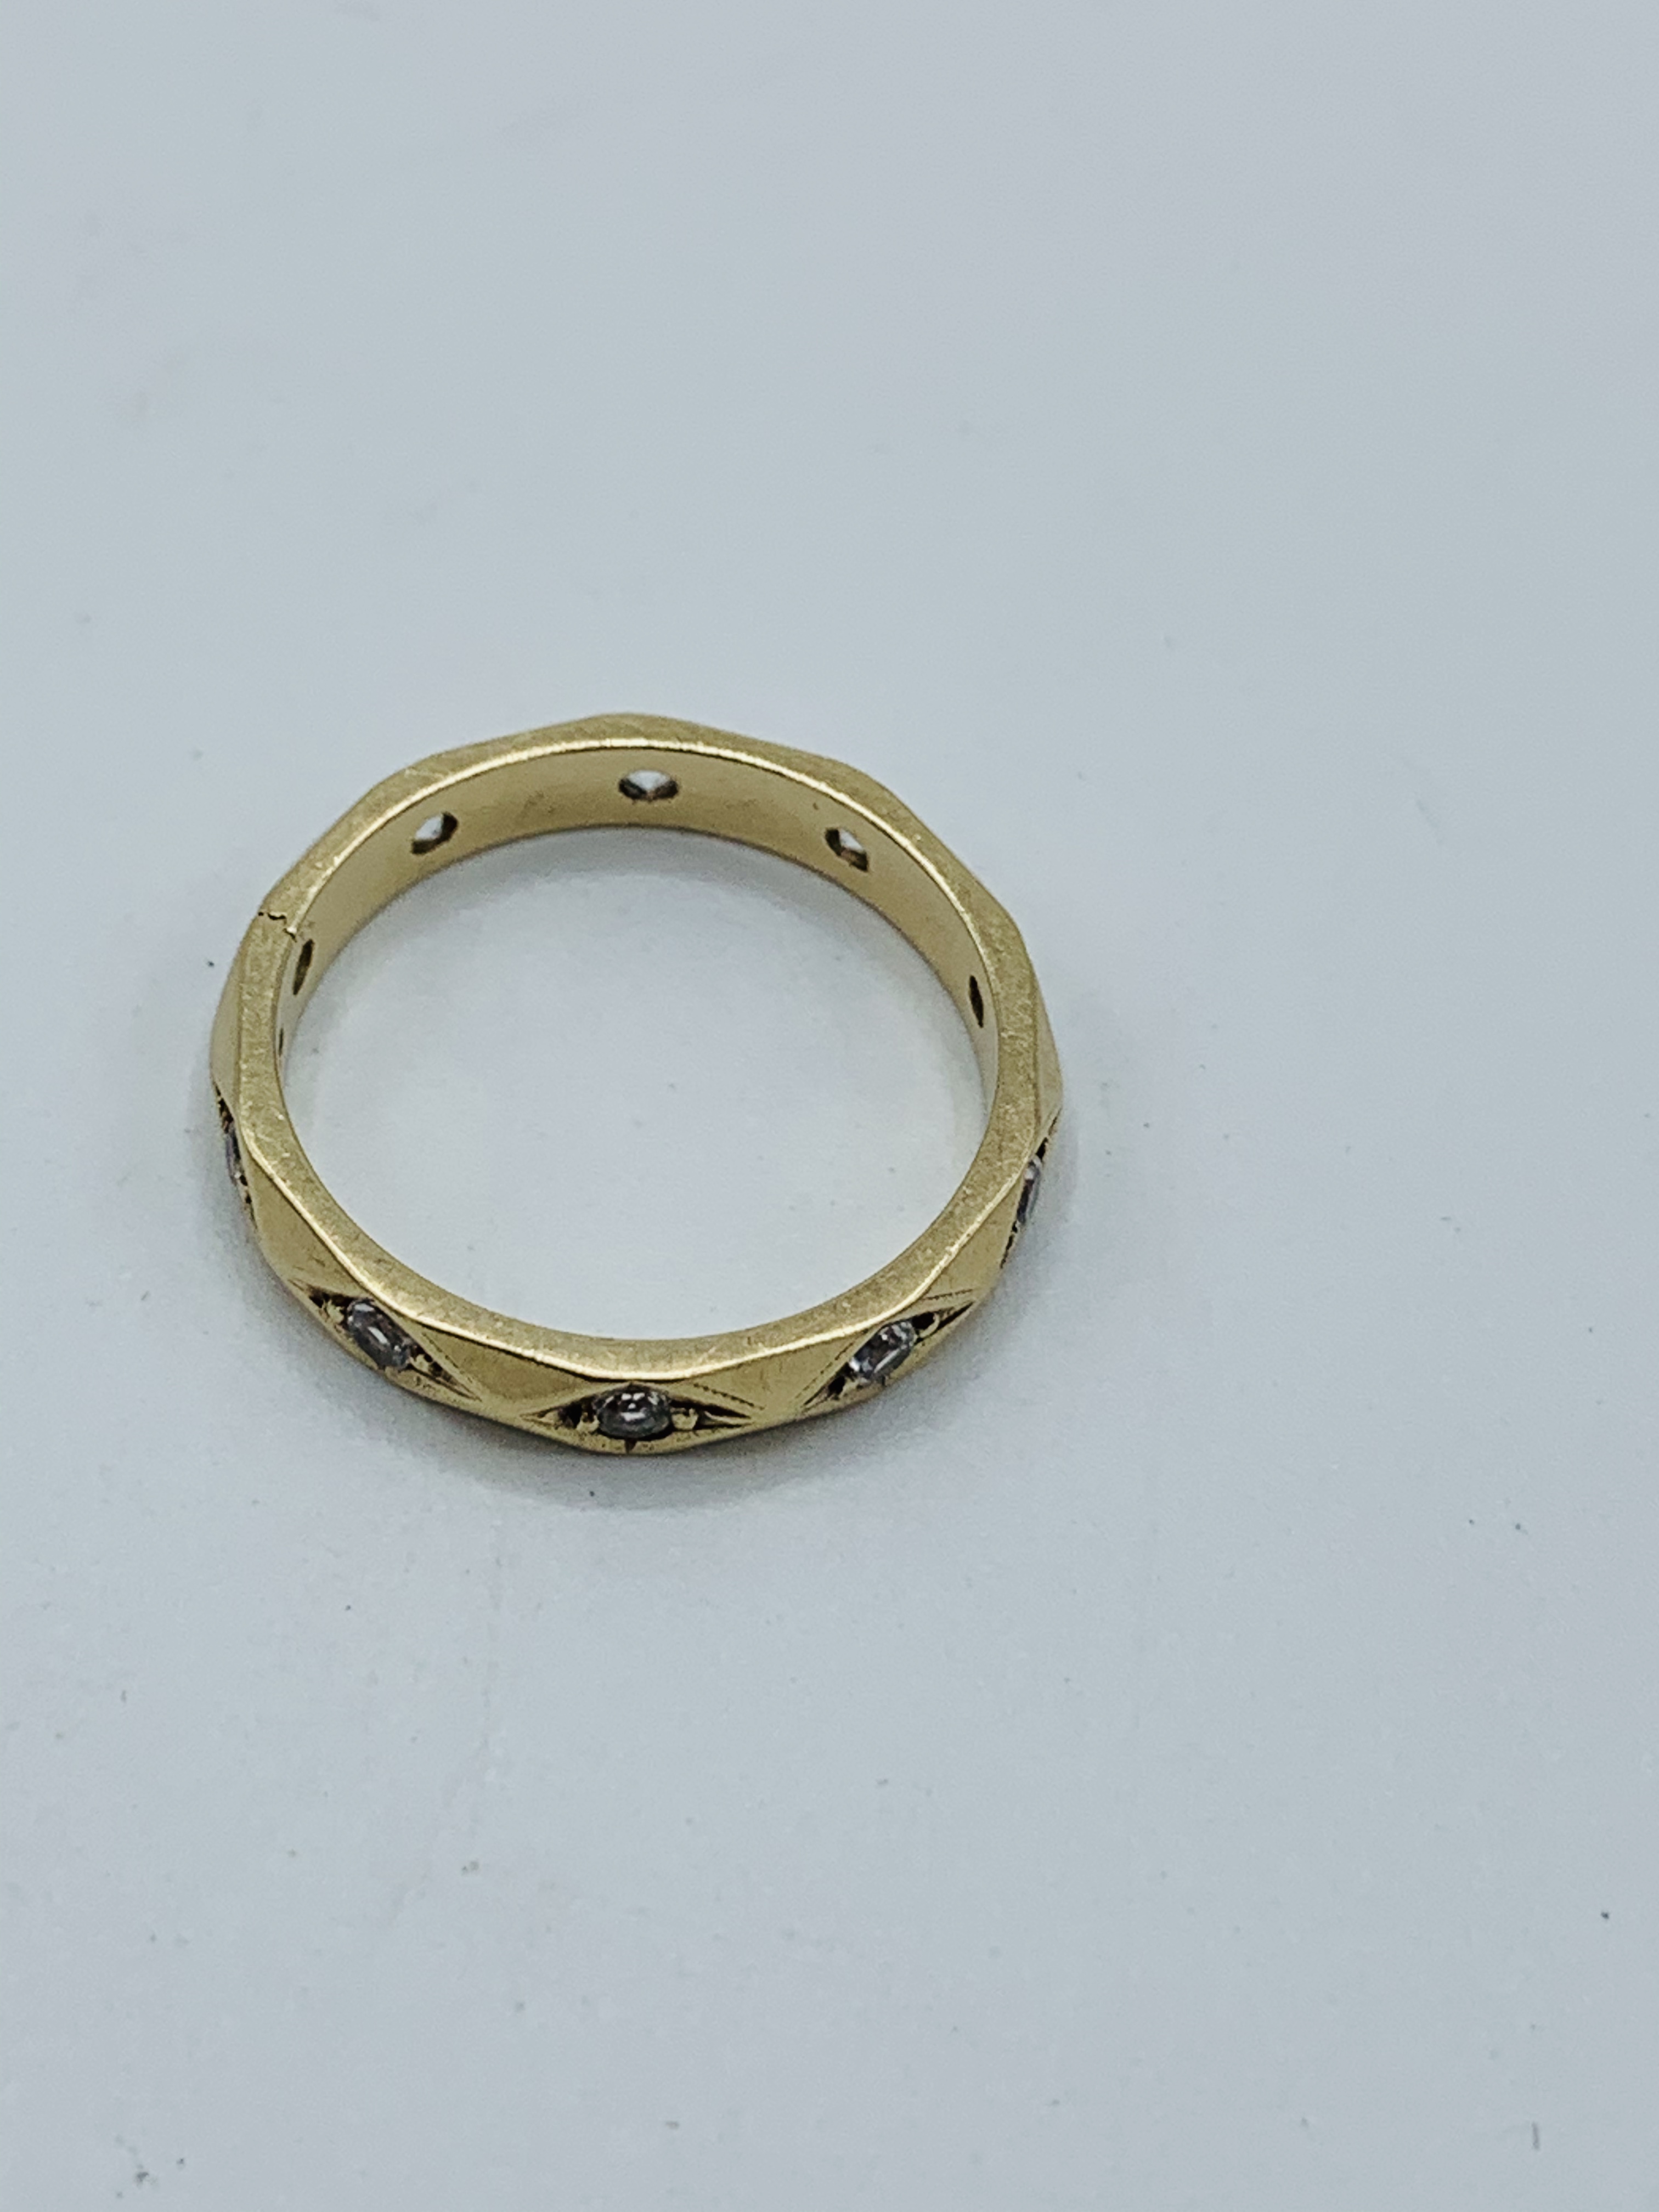 9ct gold and white stone eternity ring, 2.4gms - Image 2 of 3